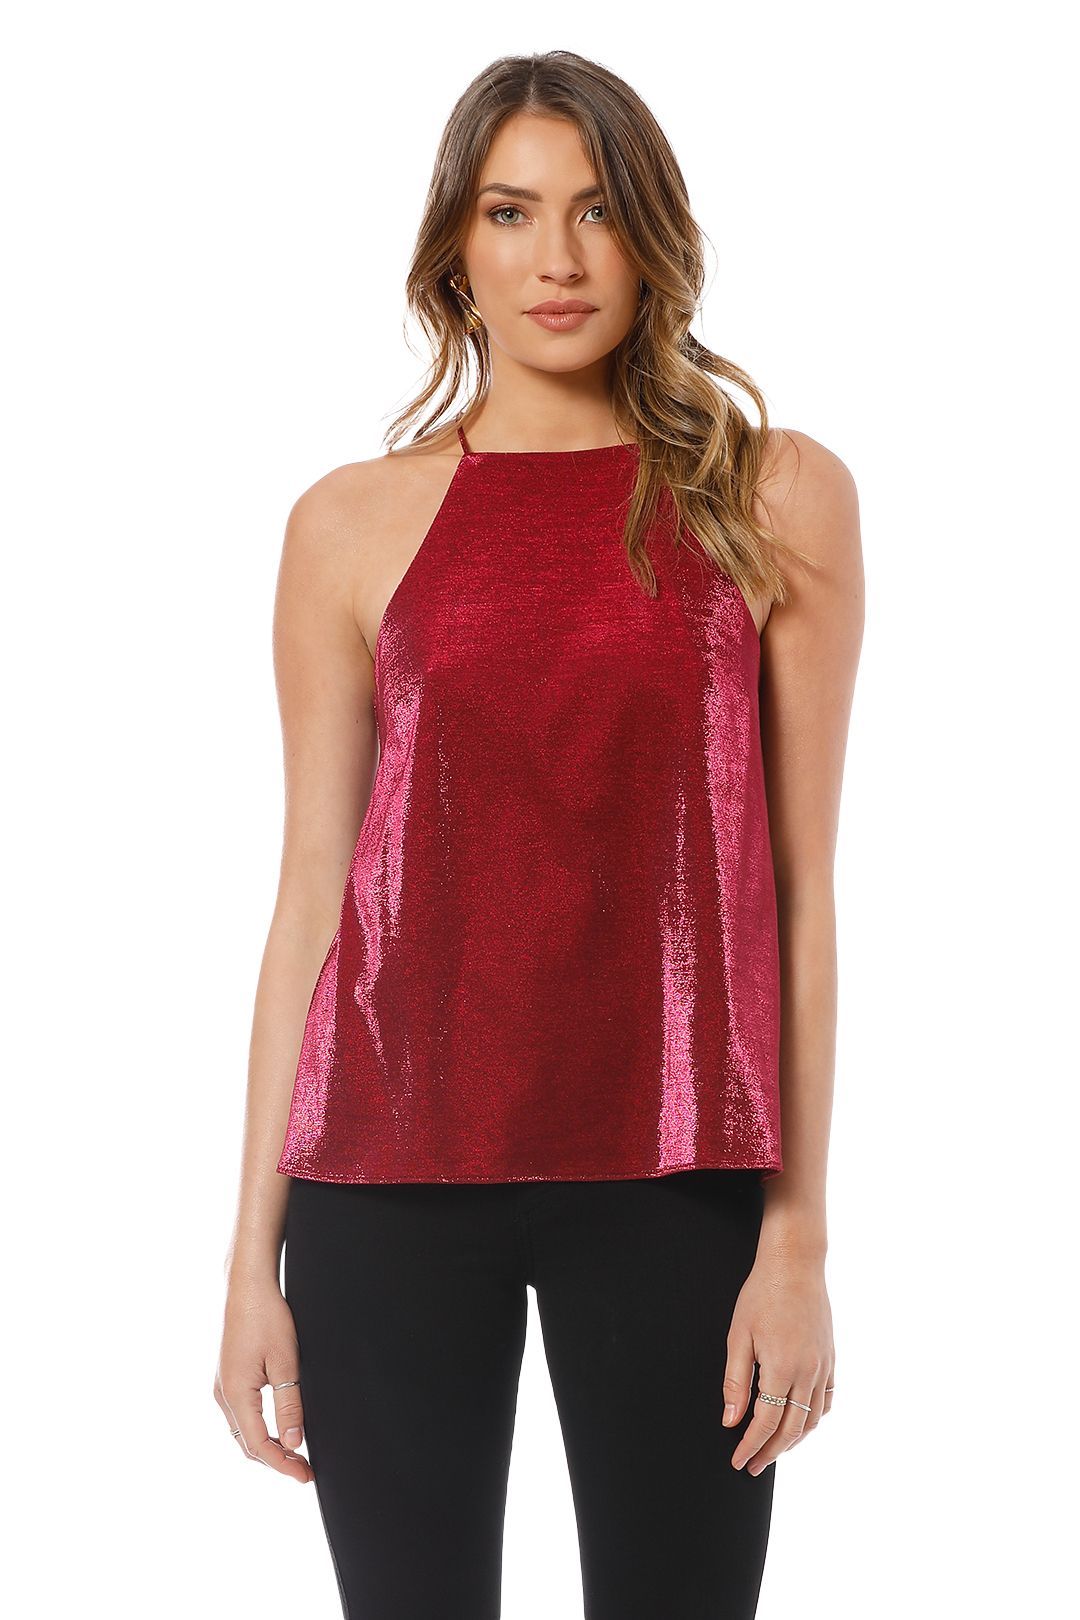 Camilla and Marc - Opasidy Top - Red - Front Crop